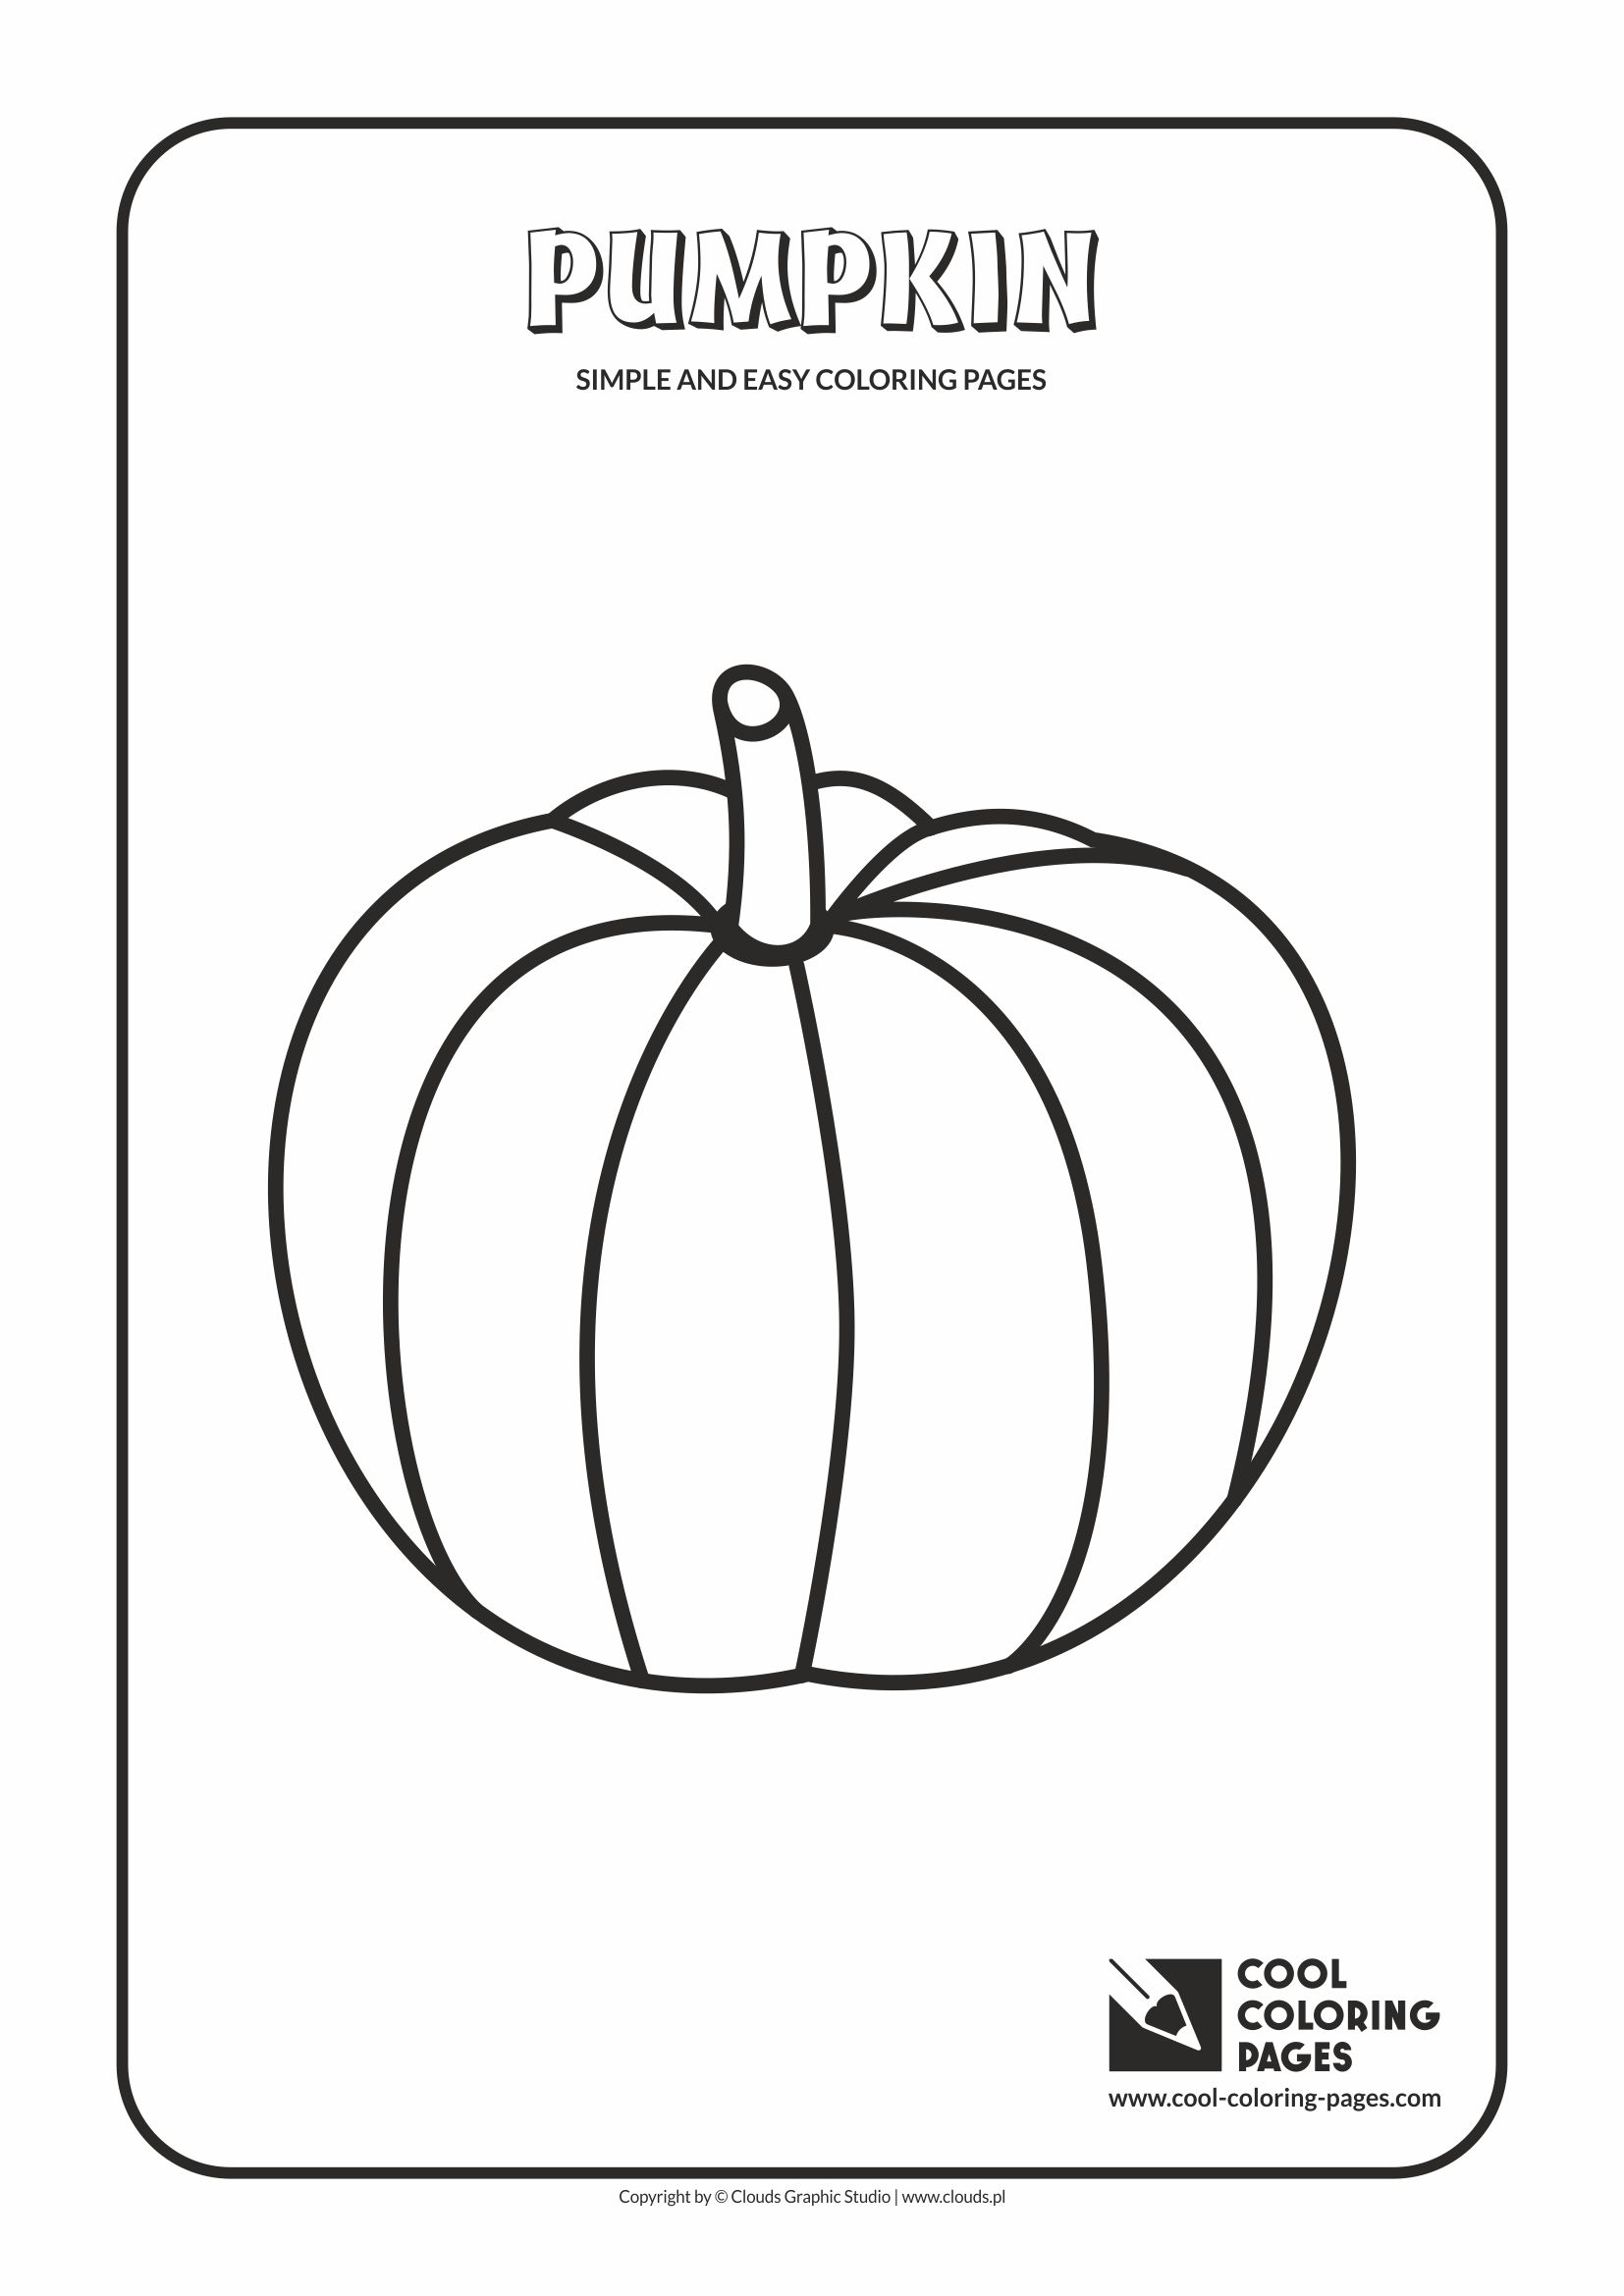 Simple and easy coloring pages for toddlers - Pumpkin